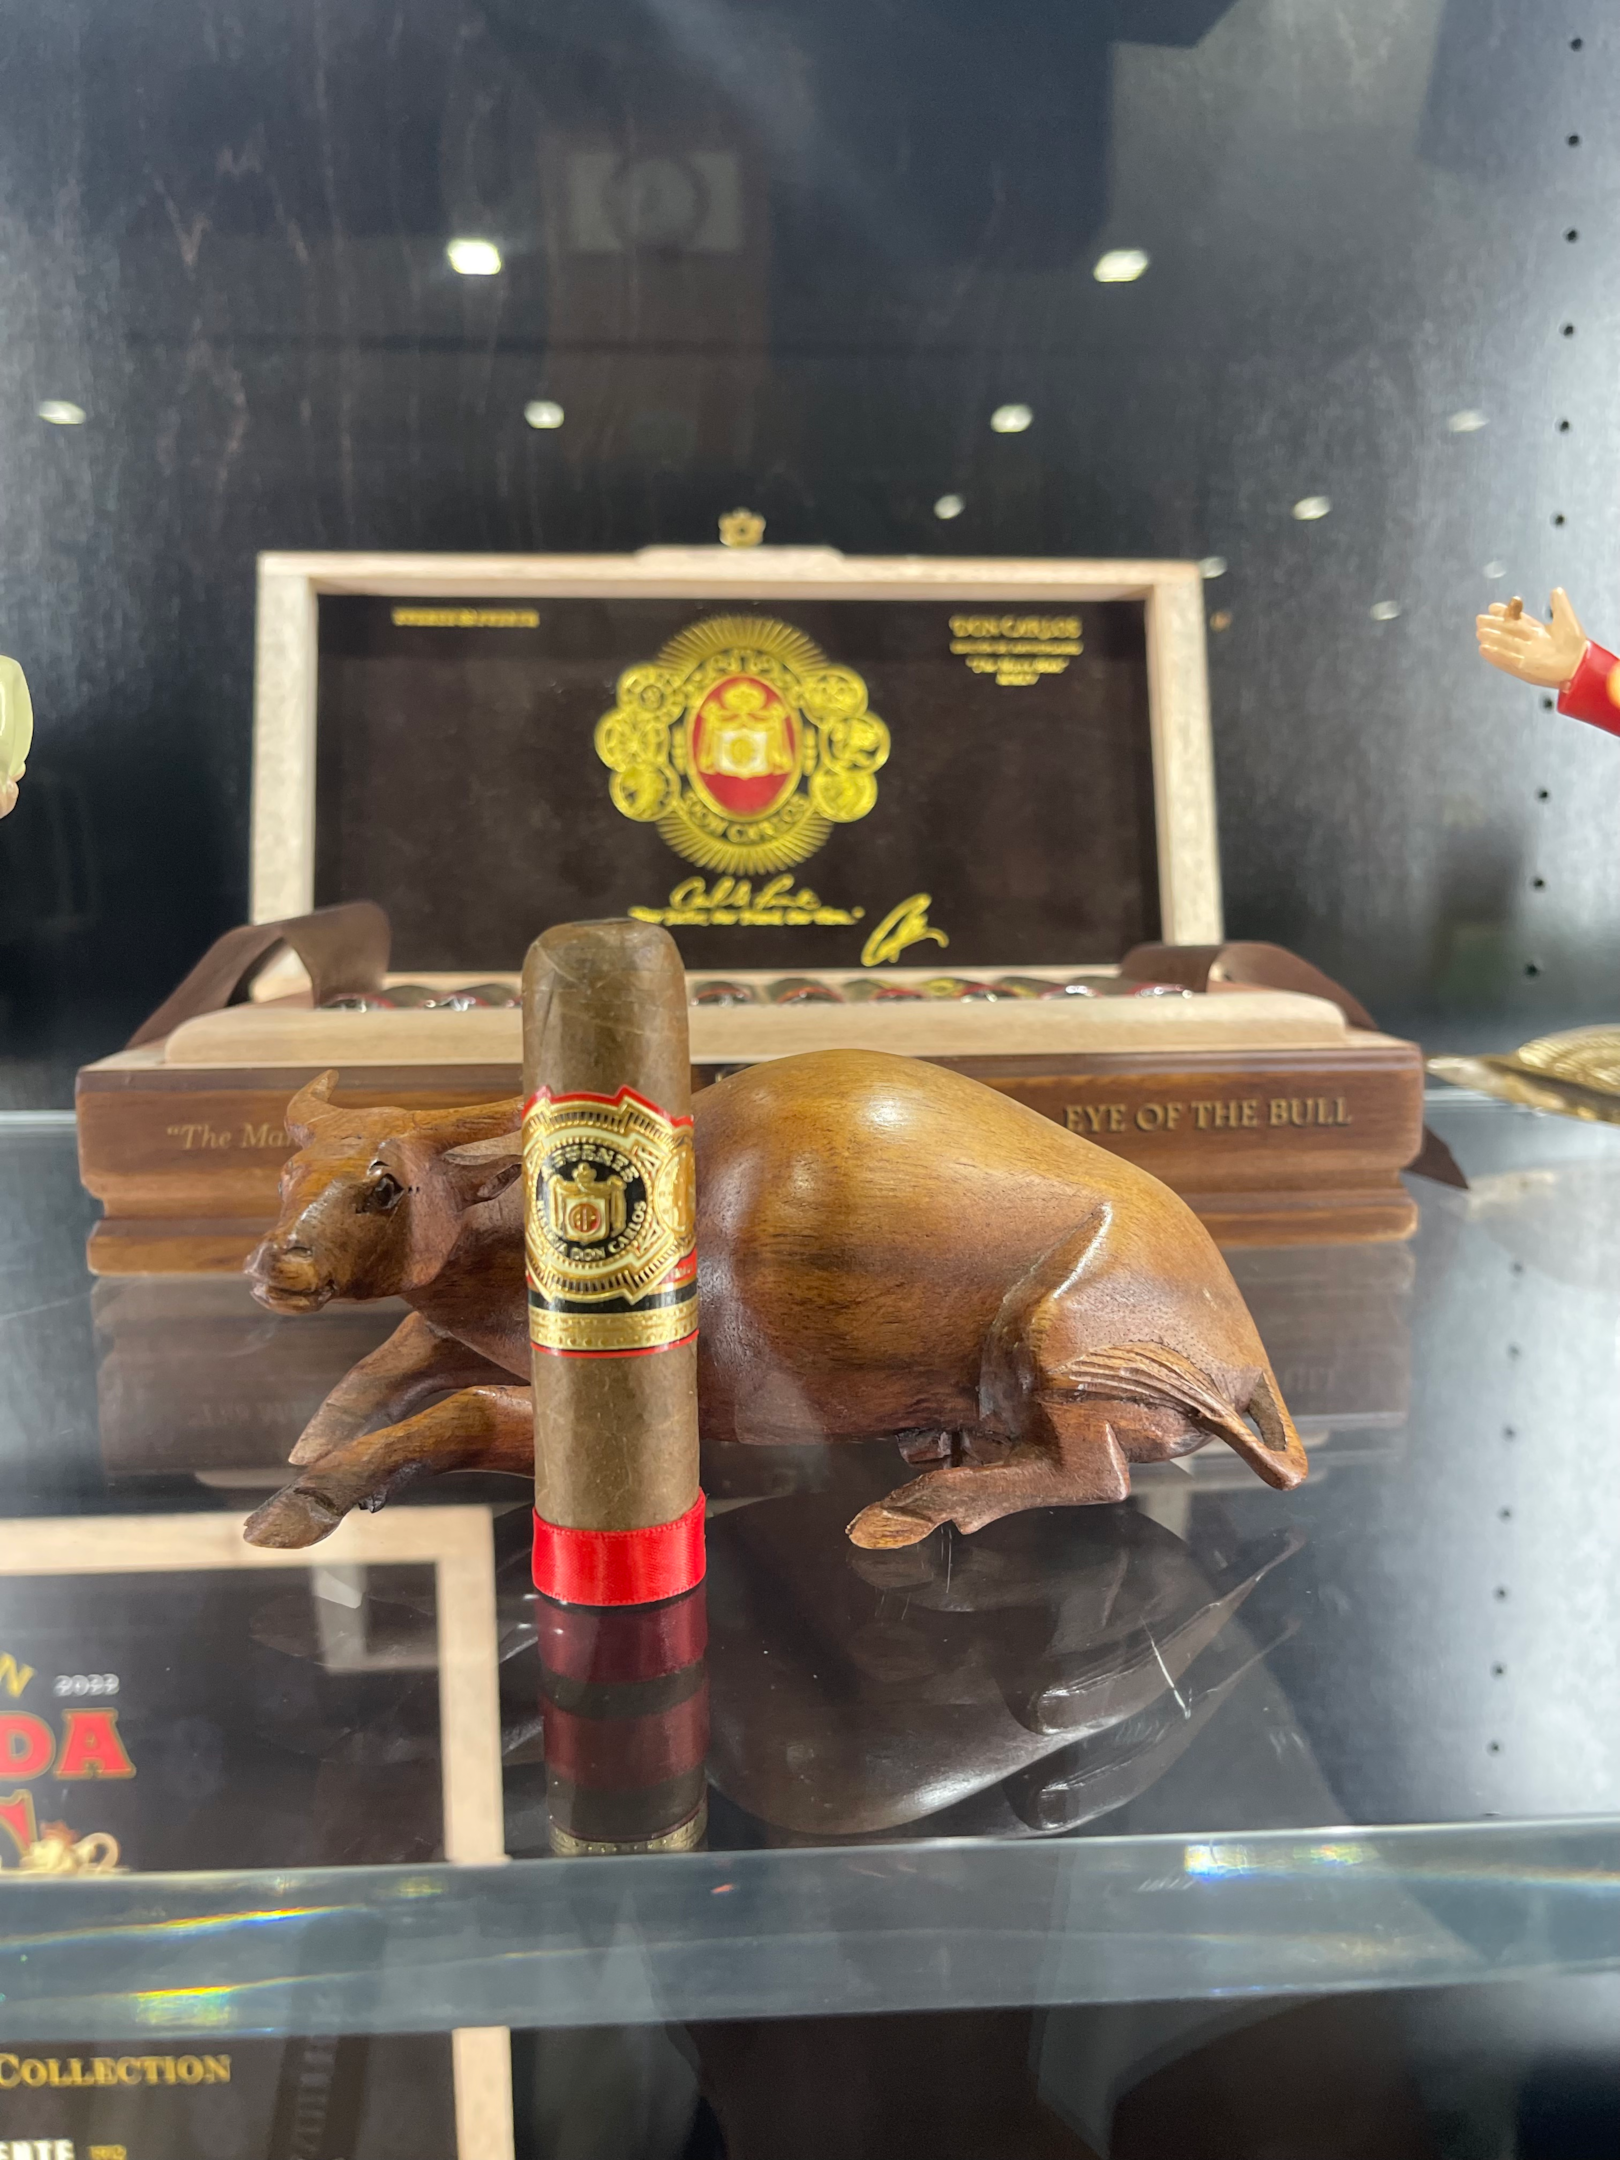 An image showcasing the latest additions to Arturo Fuente's collection of cigars, Don Carlos Eye of the Bull